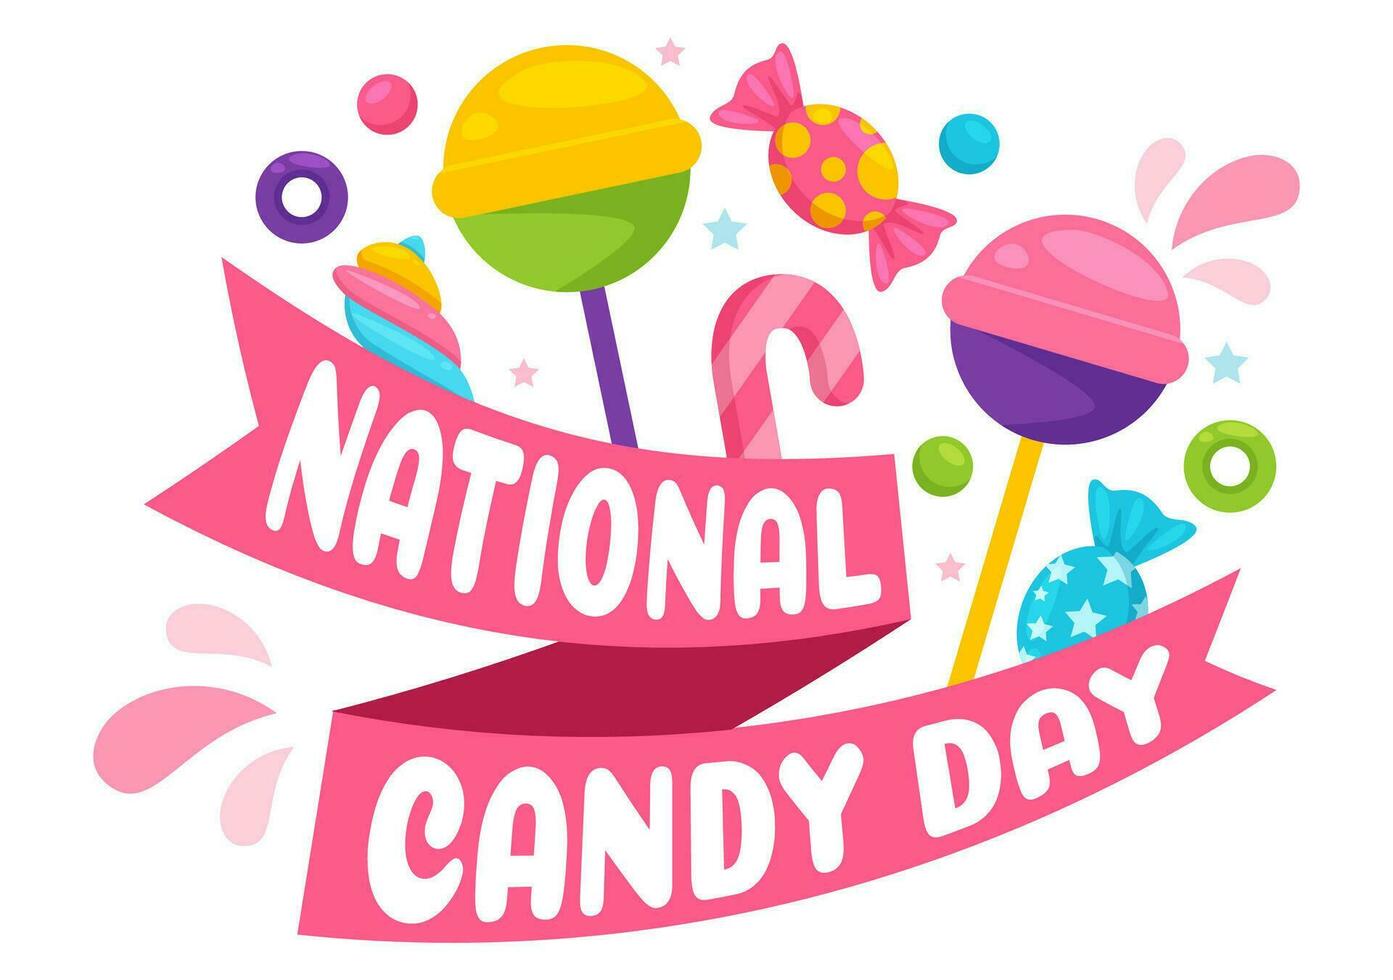 National Candy Day Vector Illustration with Different Types of Candies and Sweets in Flat Cartoon Hand Drawn Background Design Templates